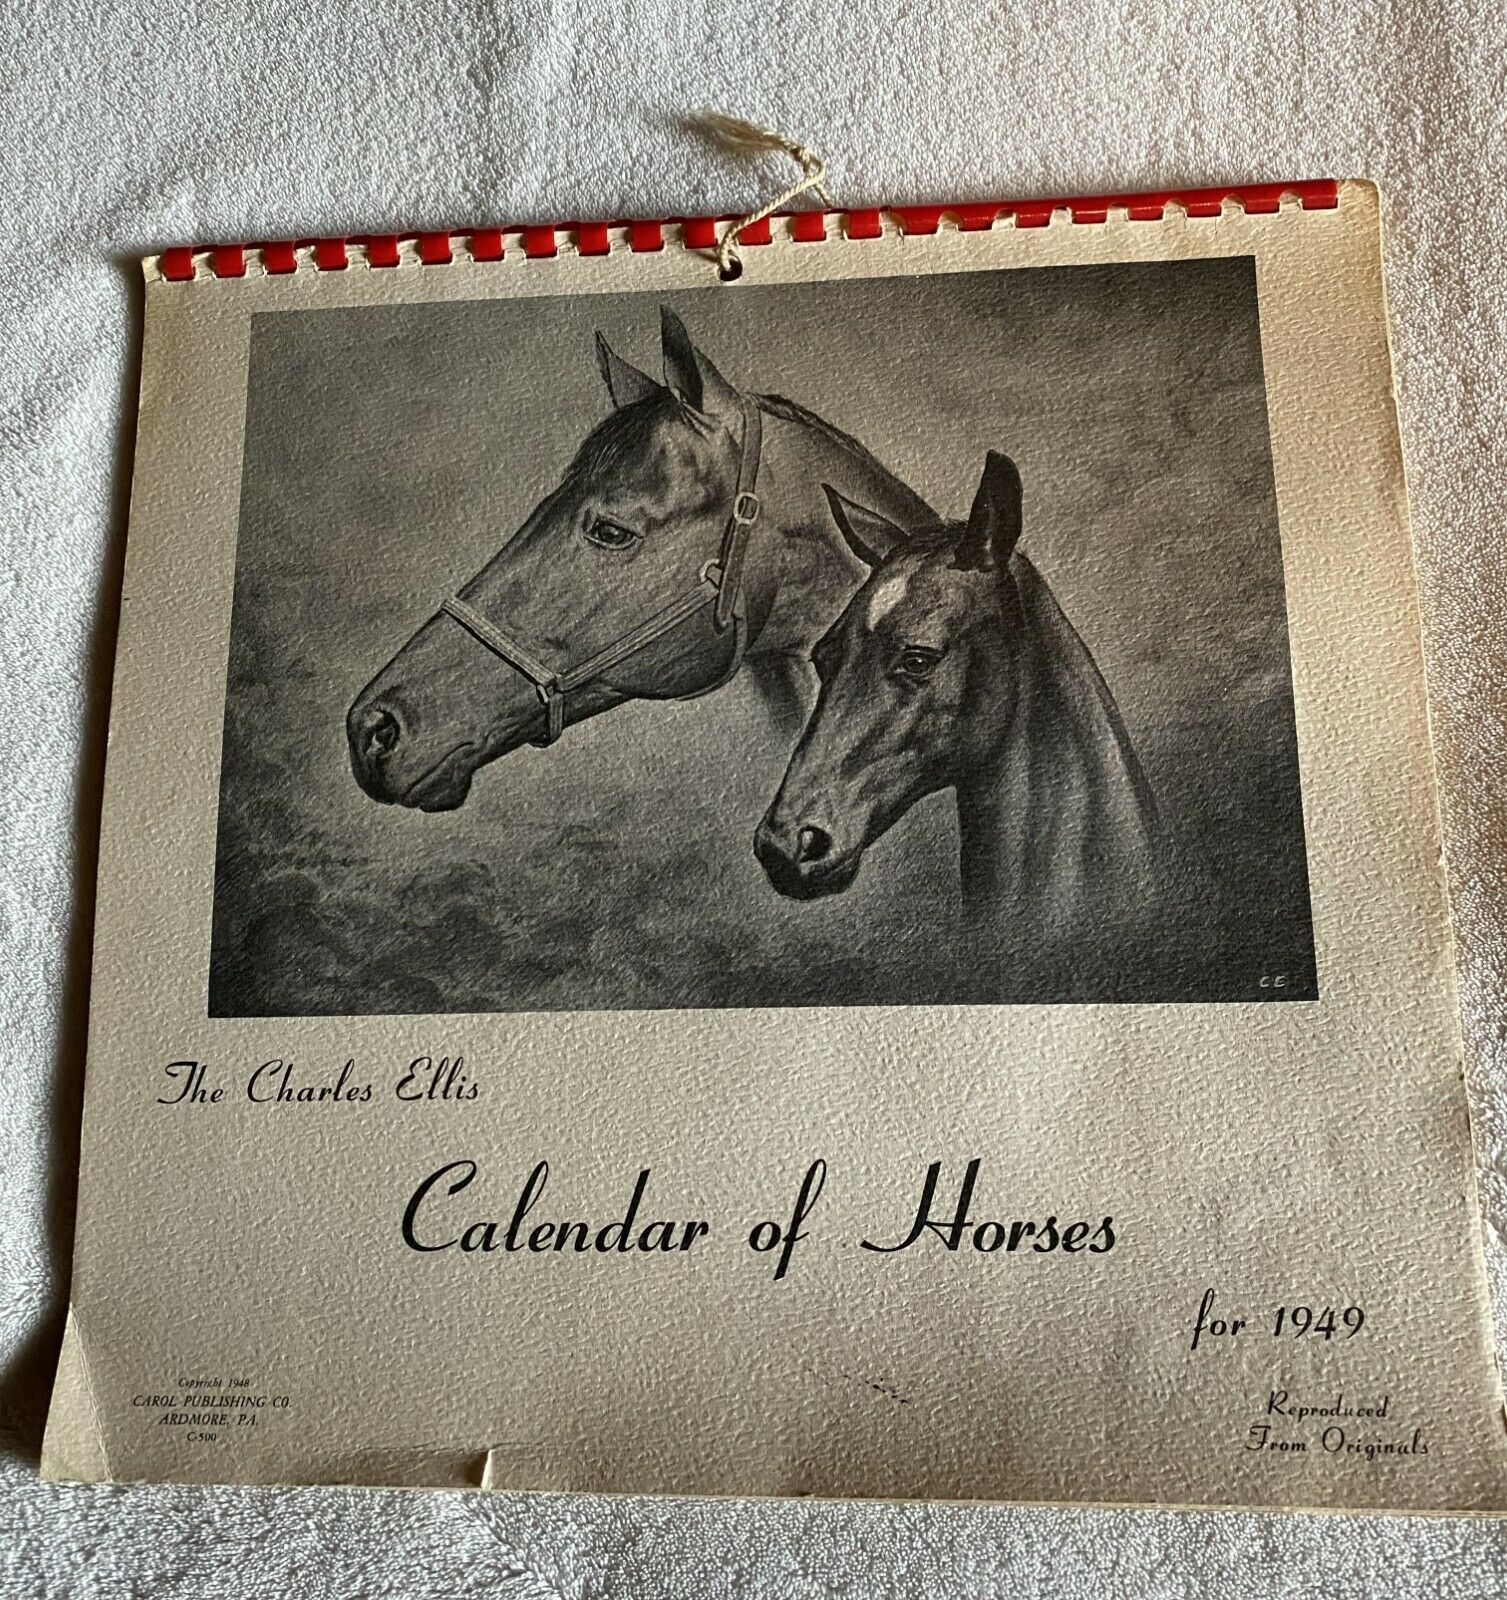 The Charles Ellis Calendar Of Horses For 1949 Reproduced From Originals